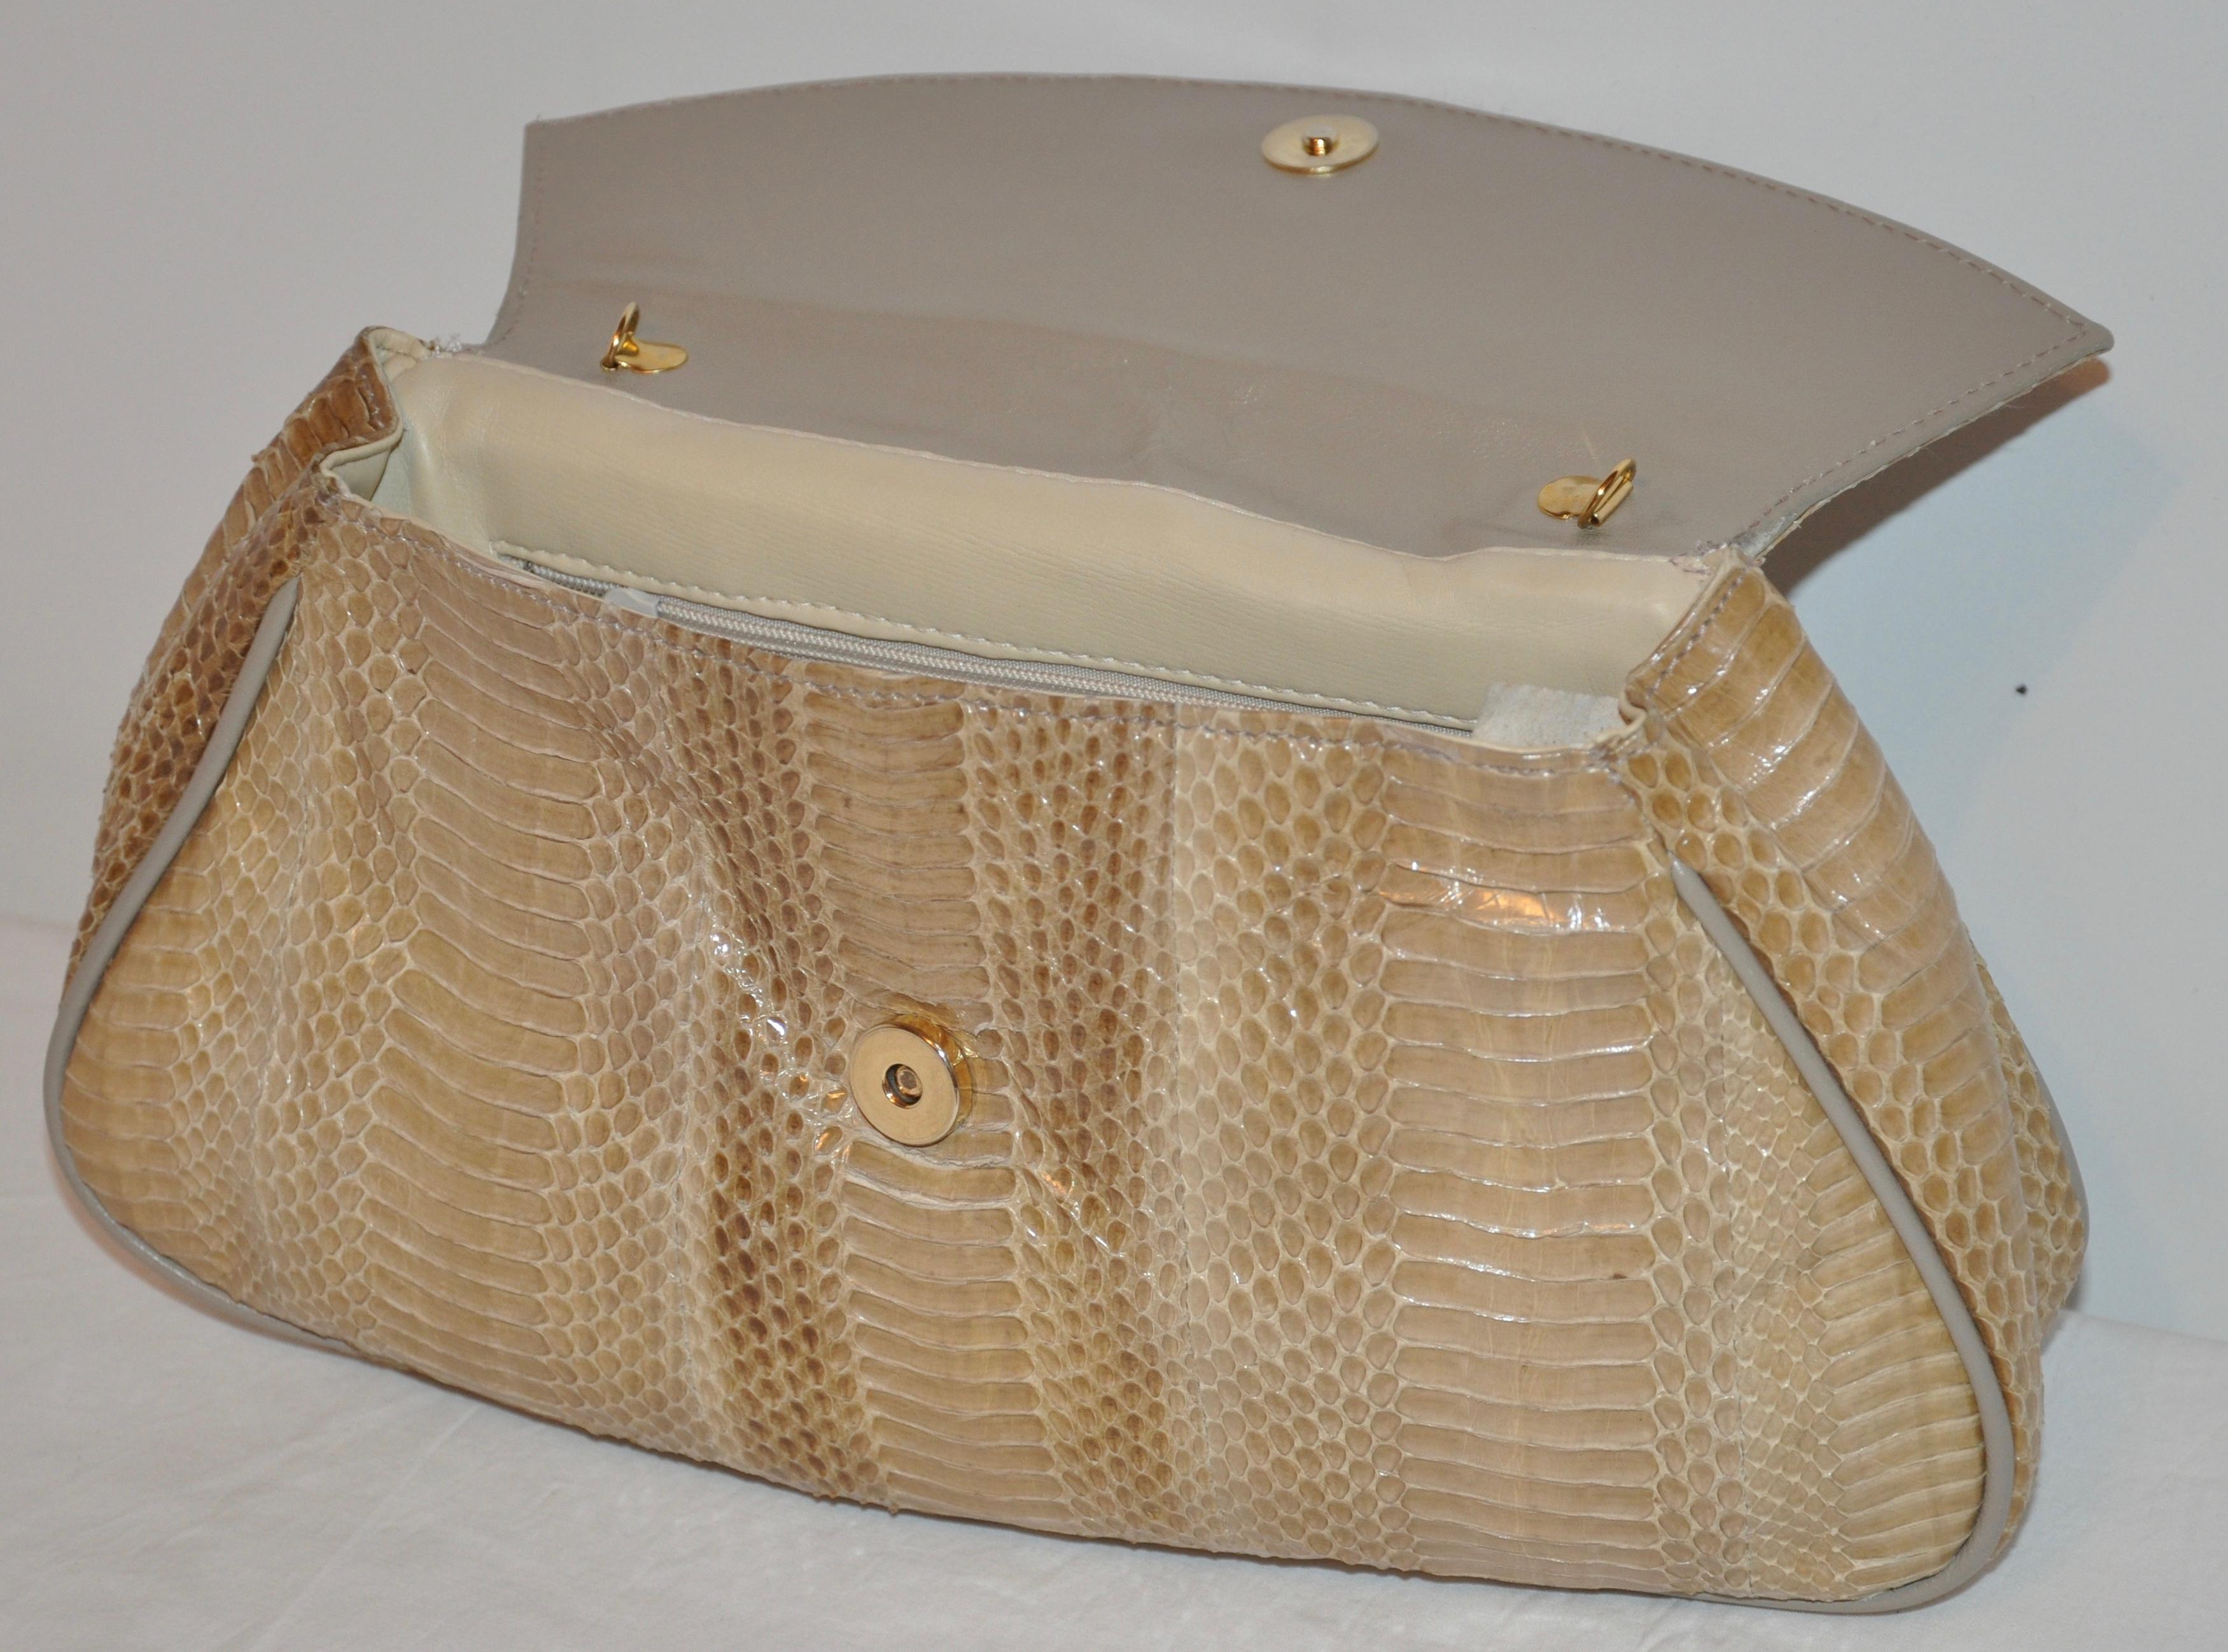 Multi Shades of Beiges & Browns Snakeskin Clutch with Optional Shoulder Straps 1